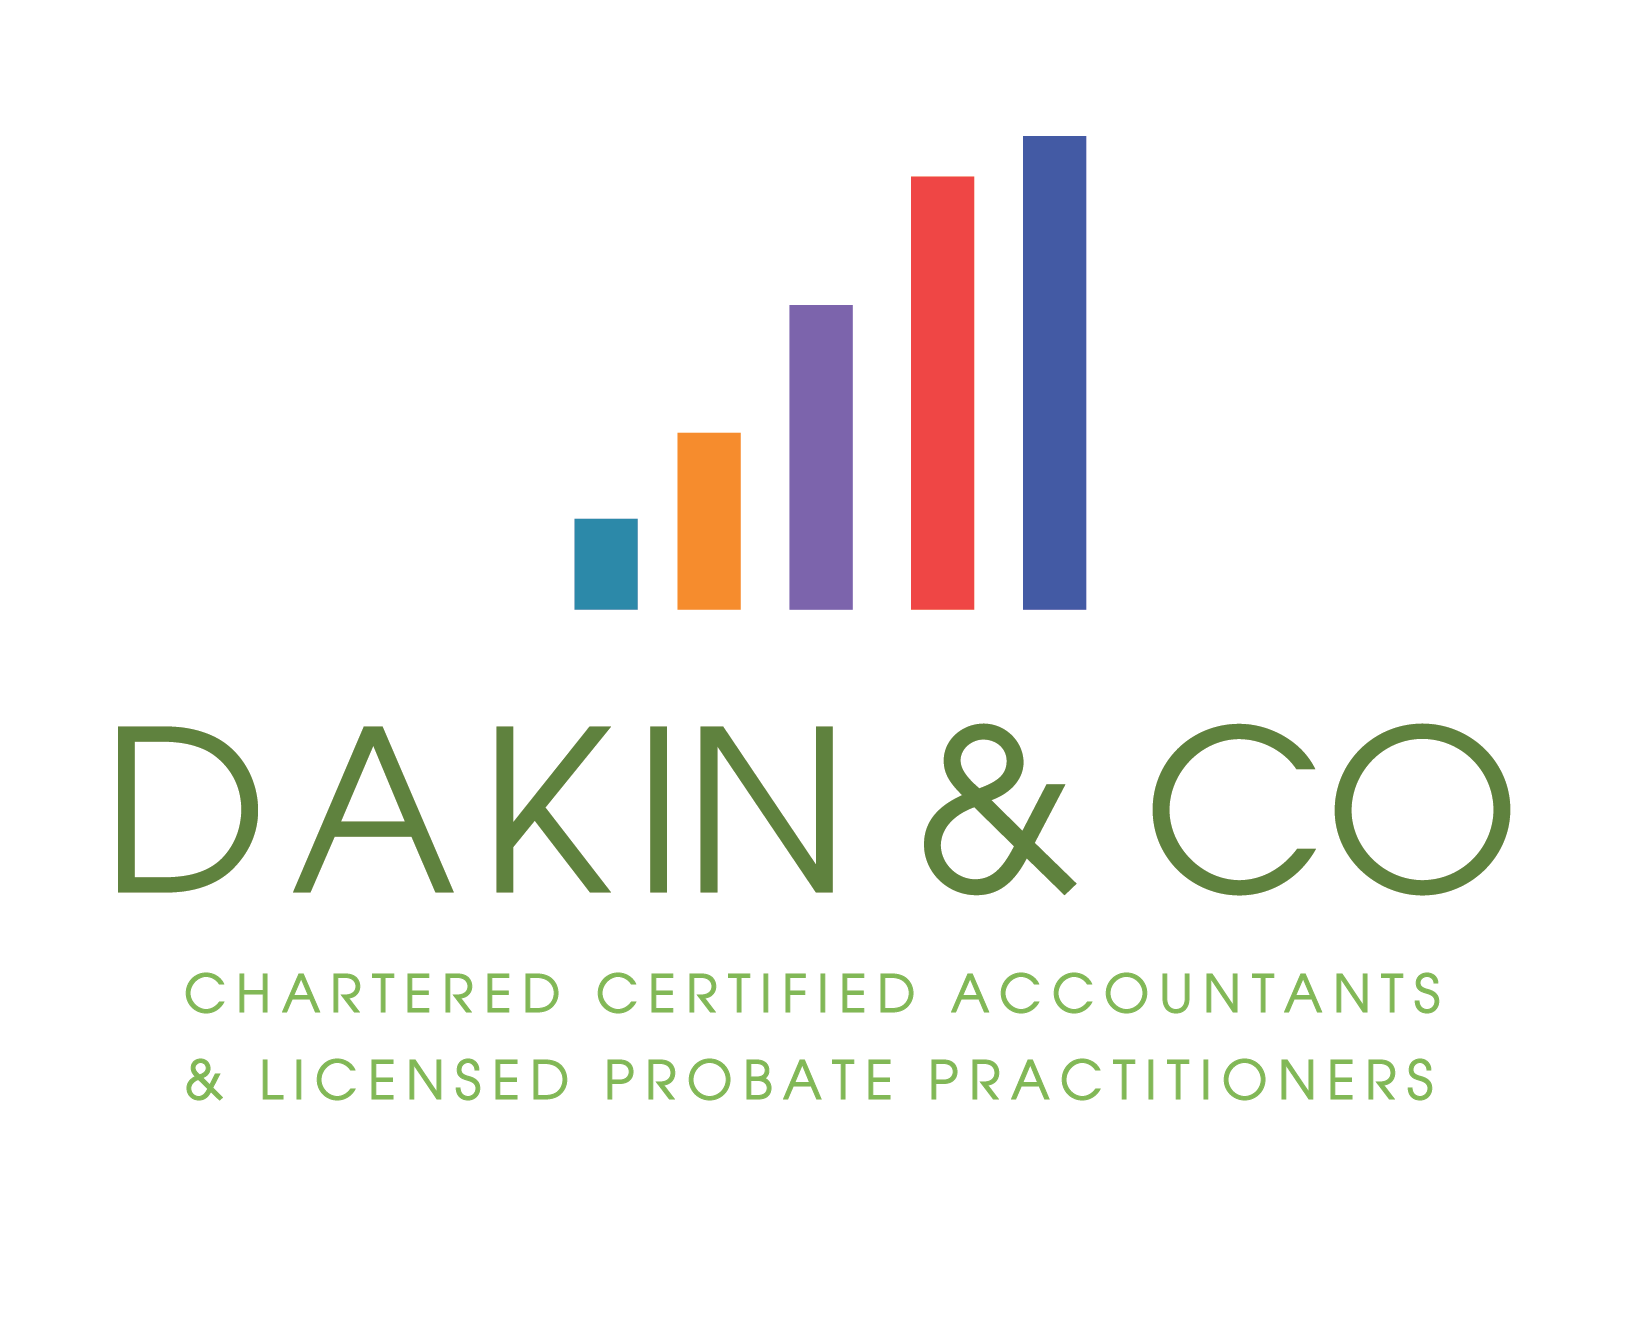 Dakin & Co, Chartered Certified Accountants & Licensed Probate Practitioners. Logo